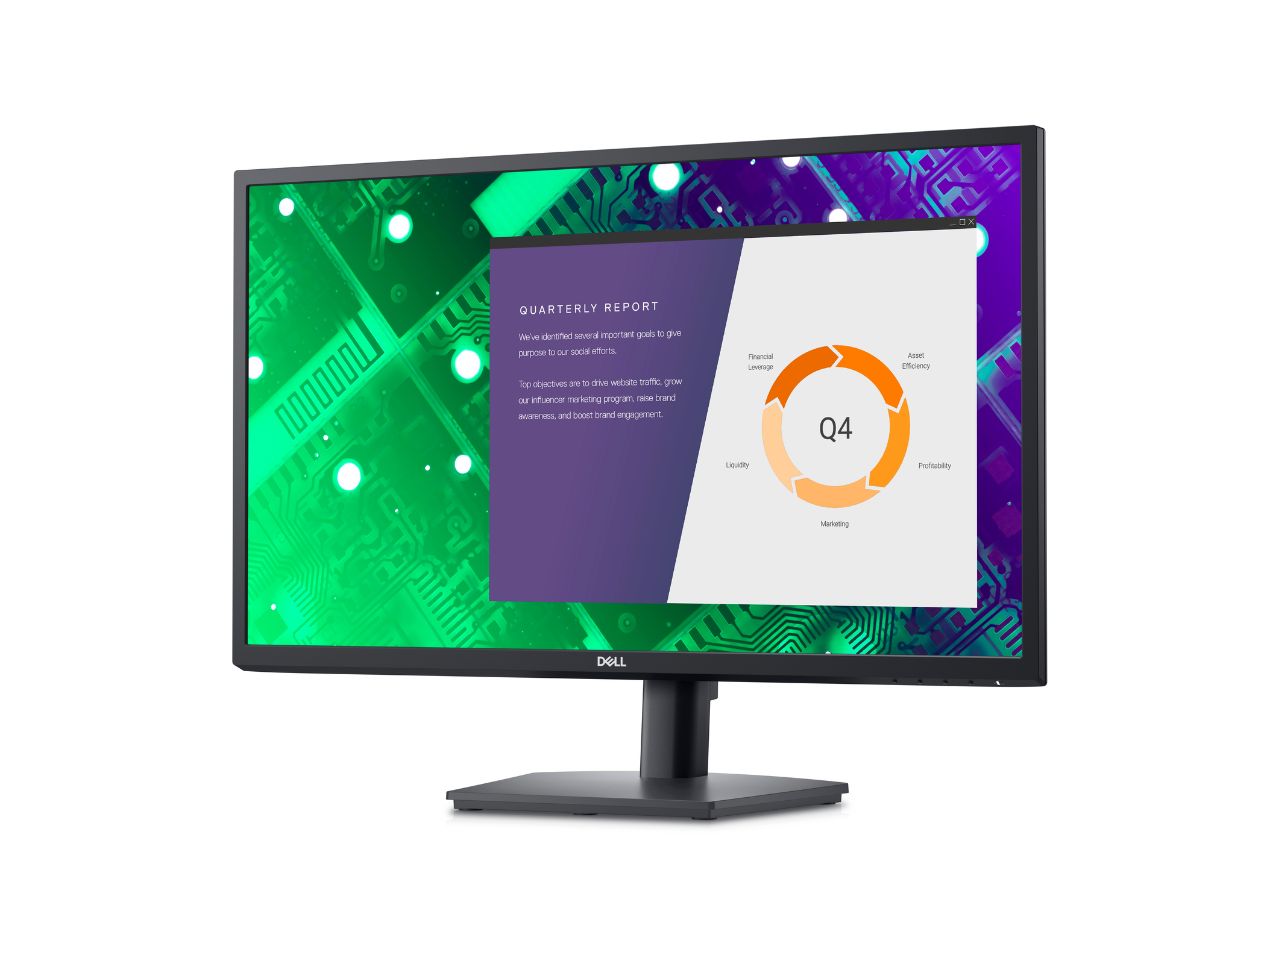 Dell 27-inch monitor on white background.